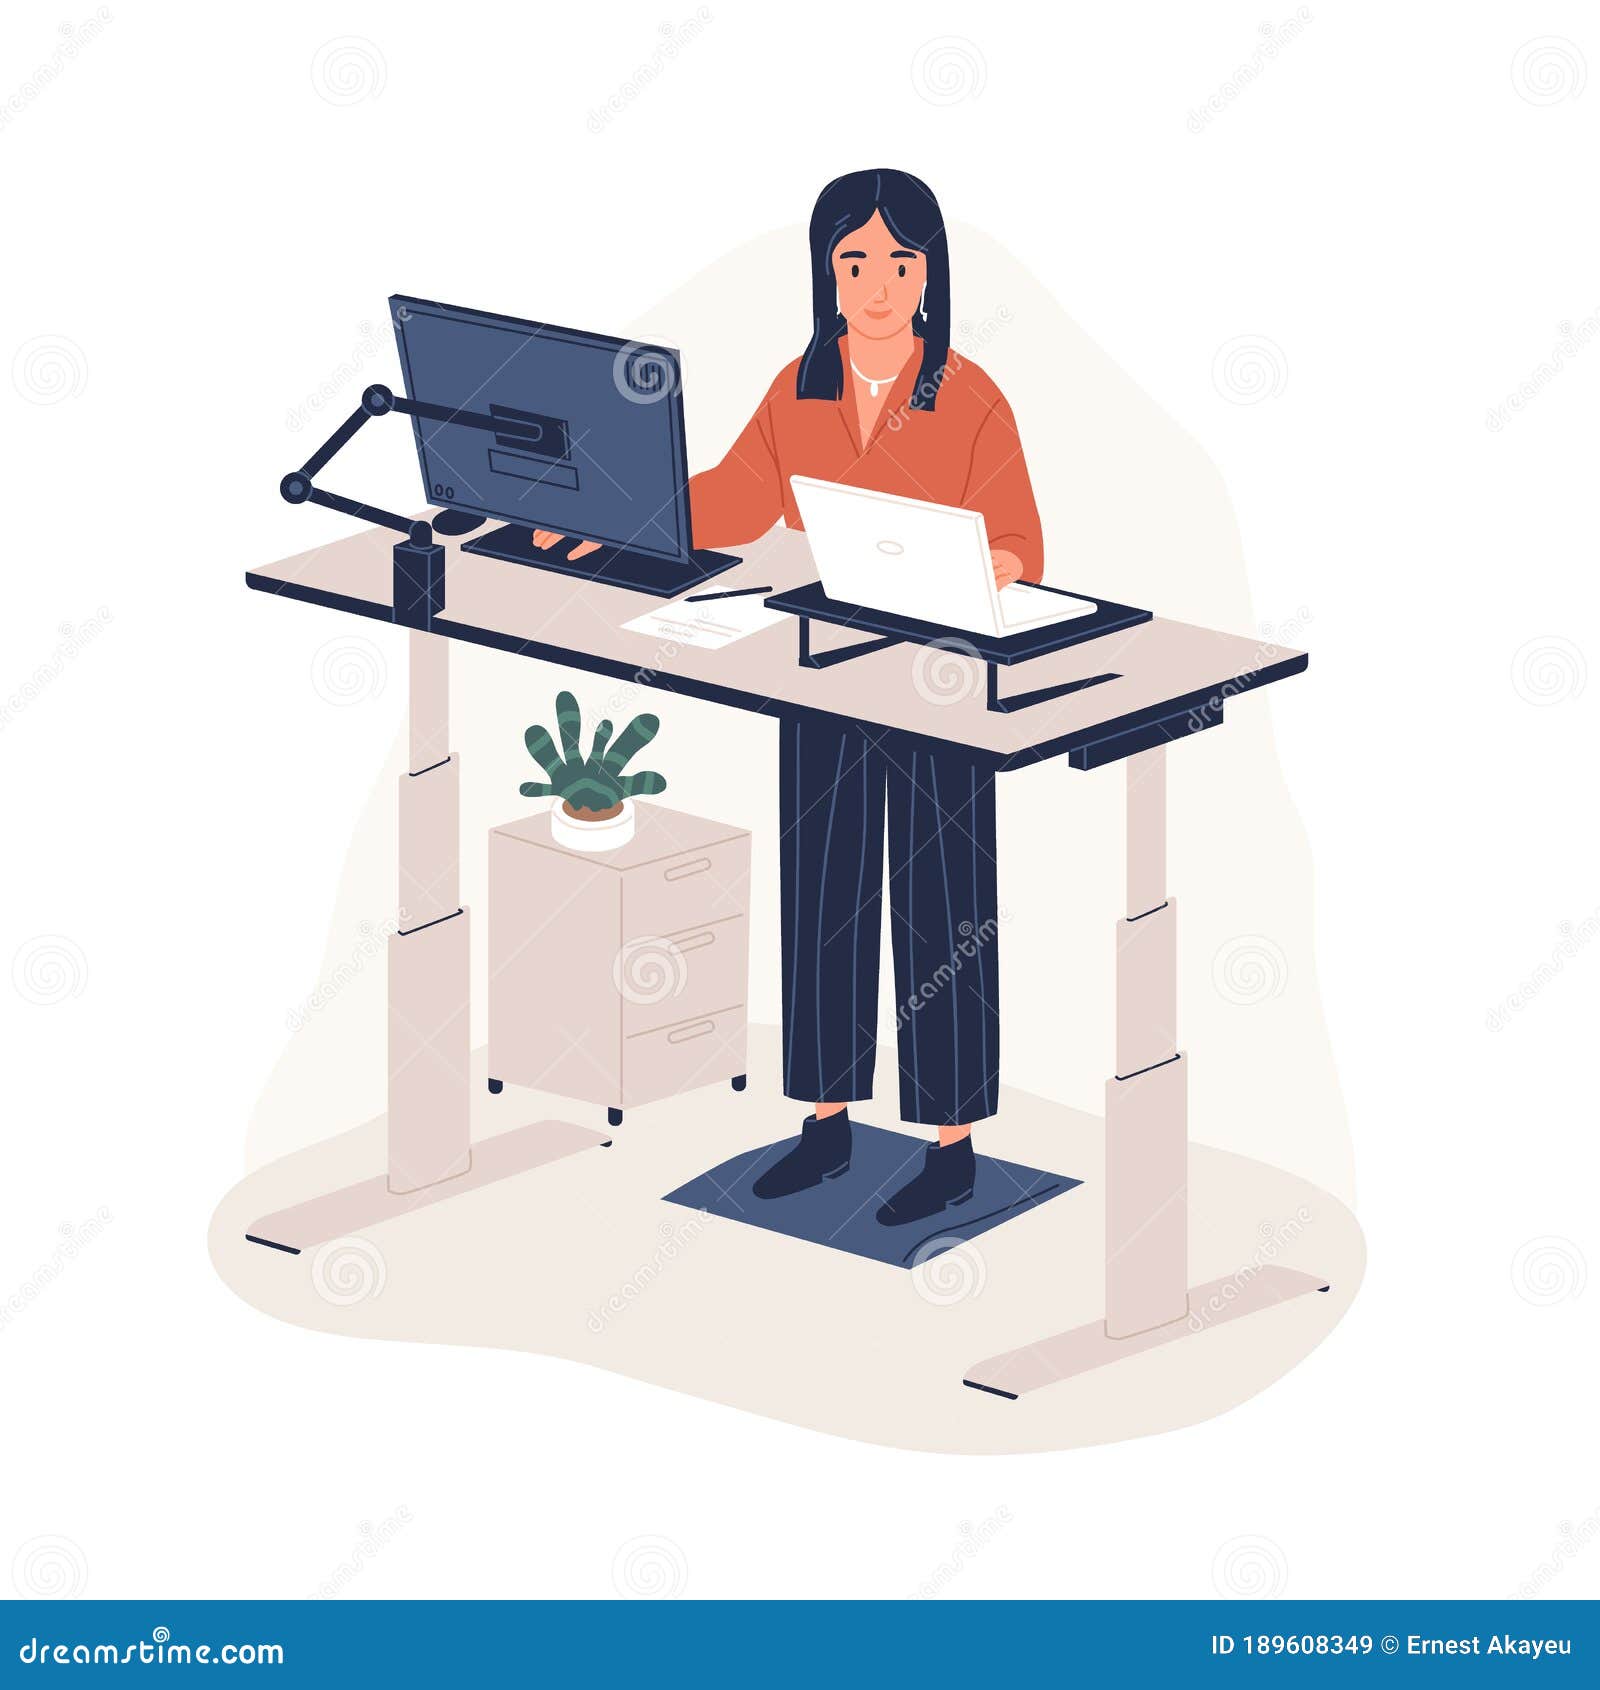 smiling woman employee working at ergonomic workstation  flat . contemporary office furnituring with